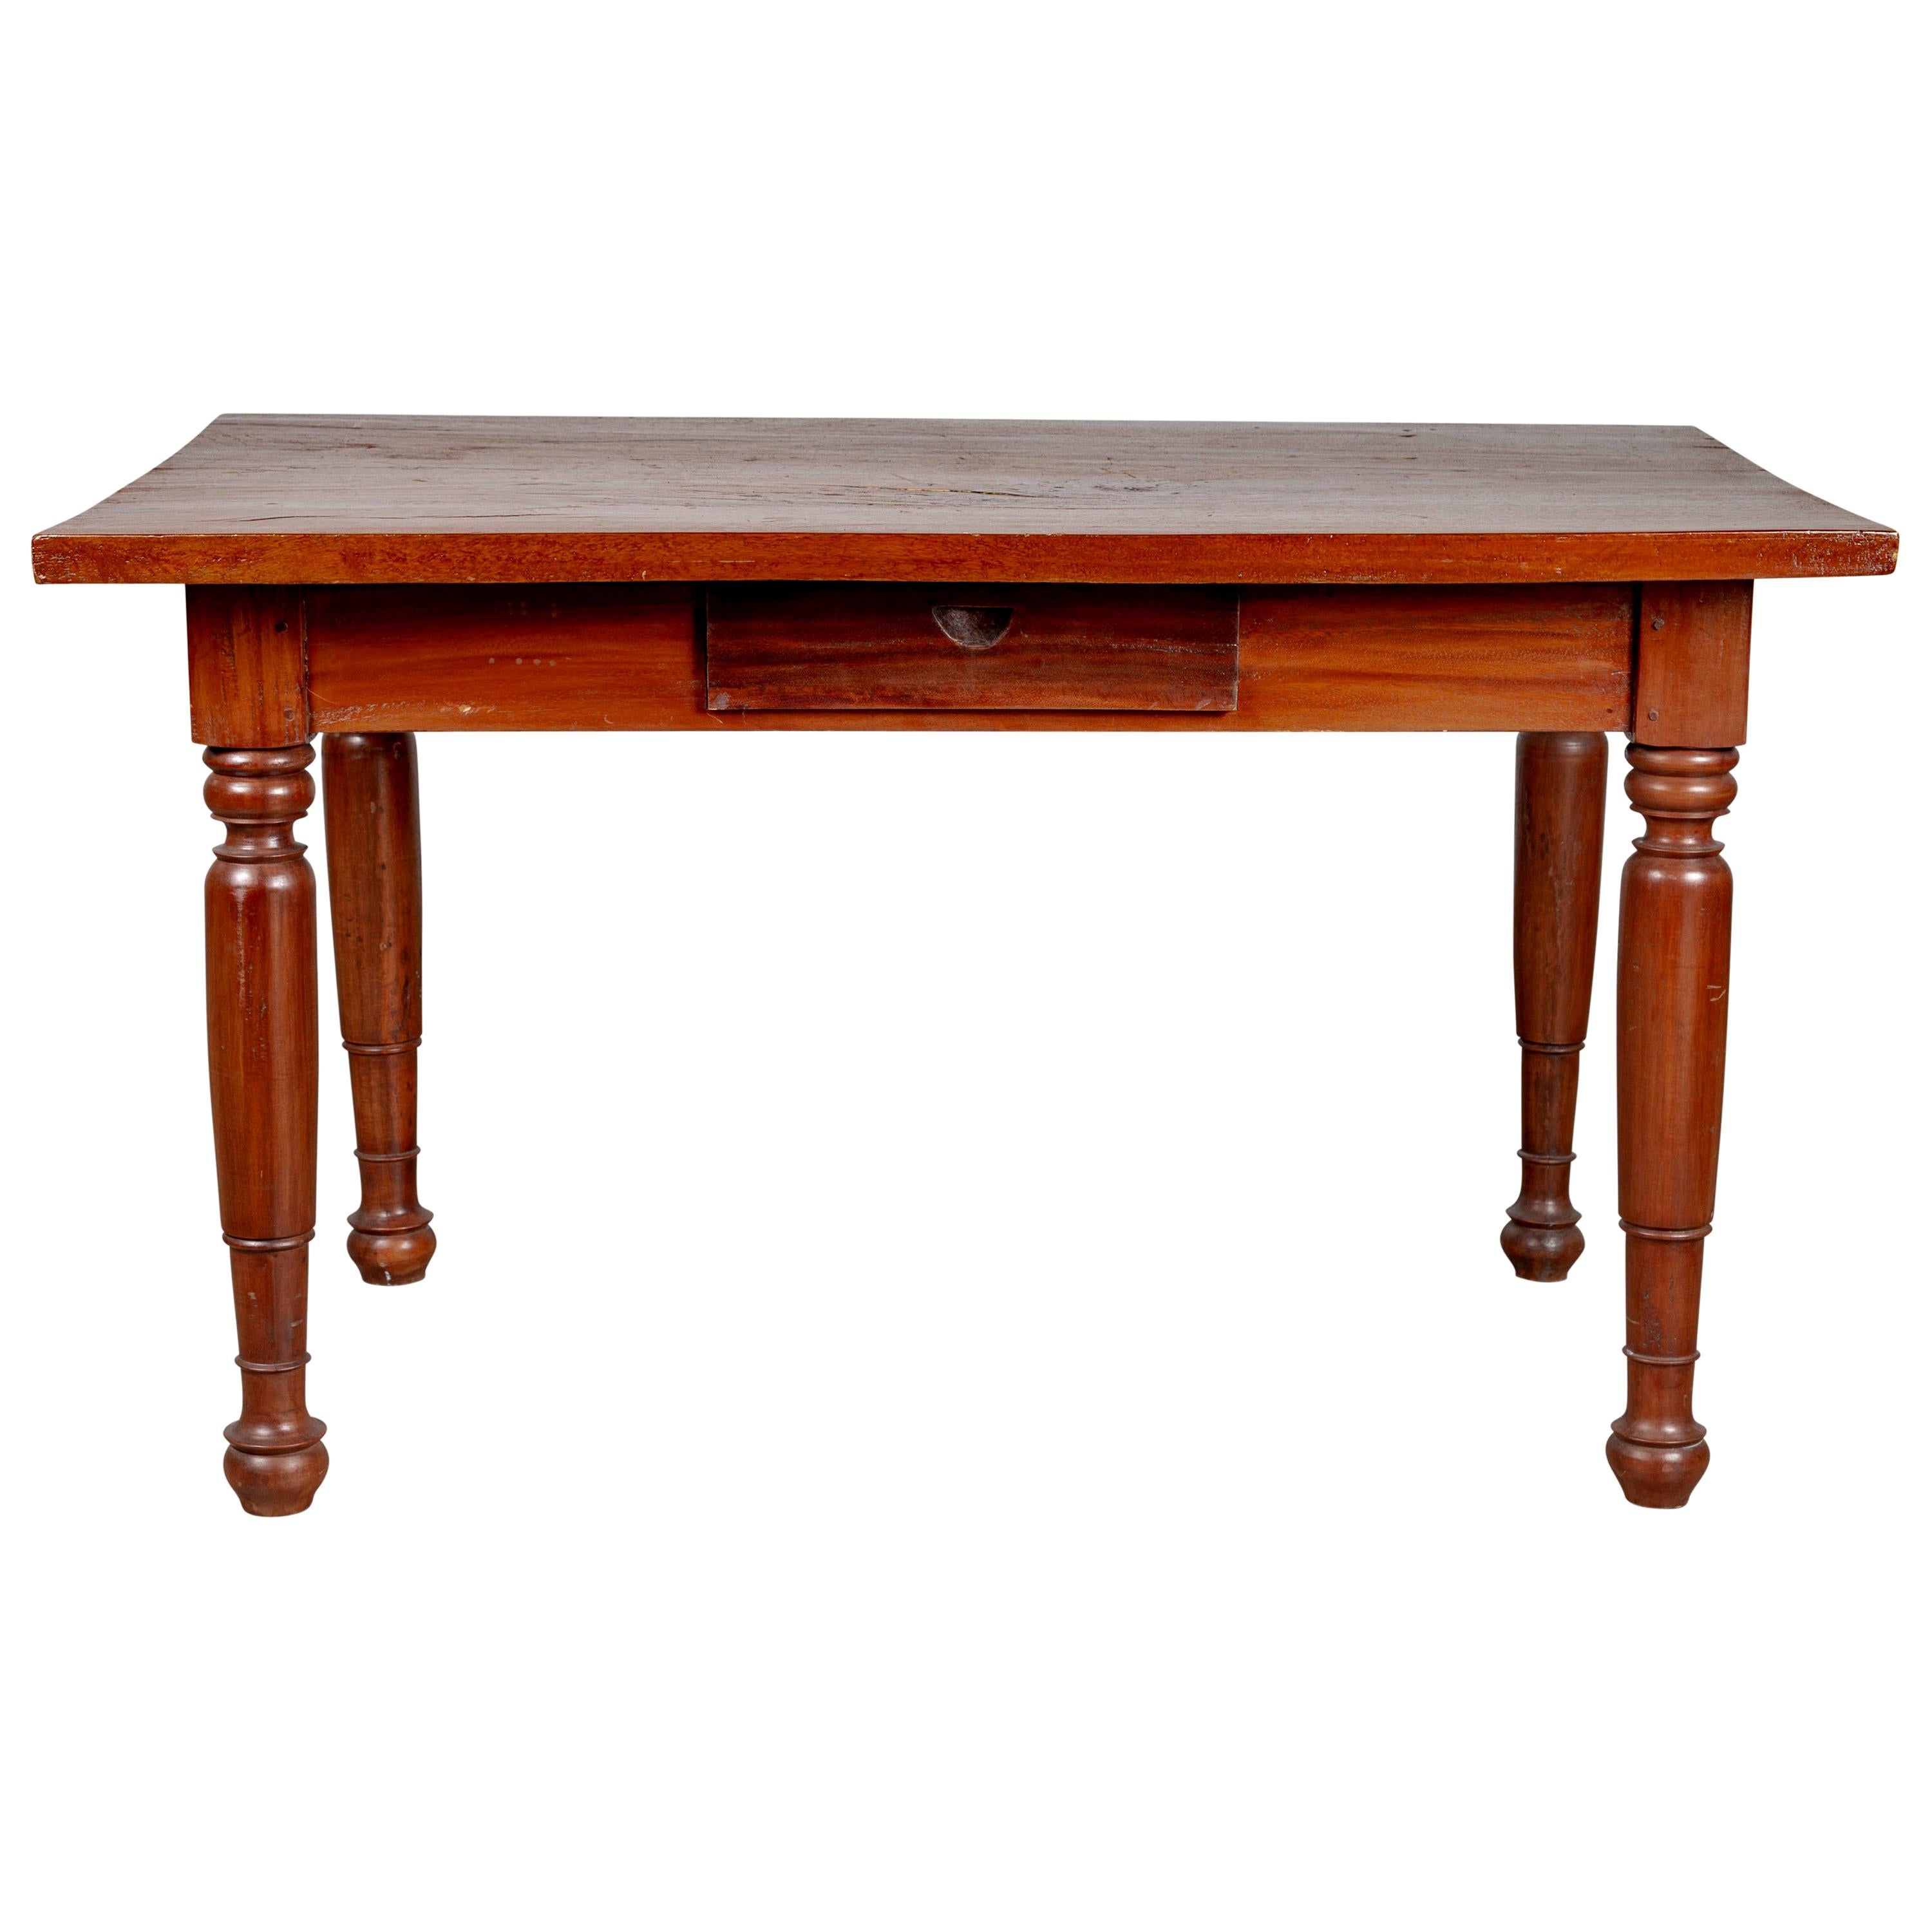 Antique Dutch Colonial Javanese Teak Desk with Single Drawer and Turned Legs  For Sale at 1stDibs | desk with turned legs